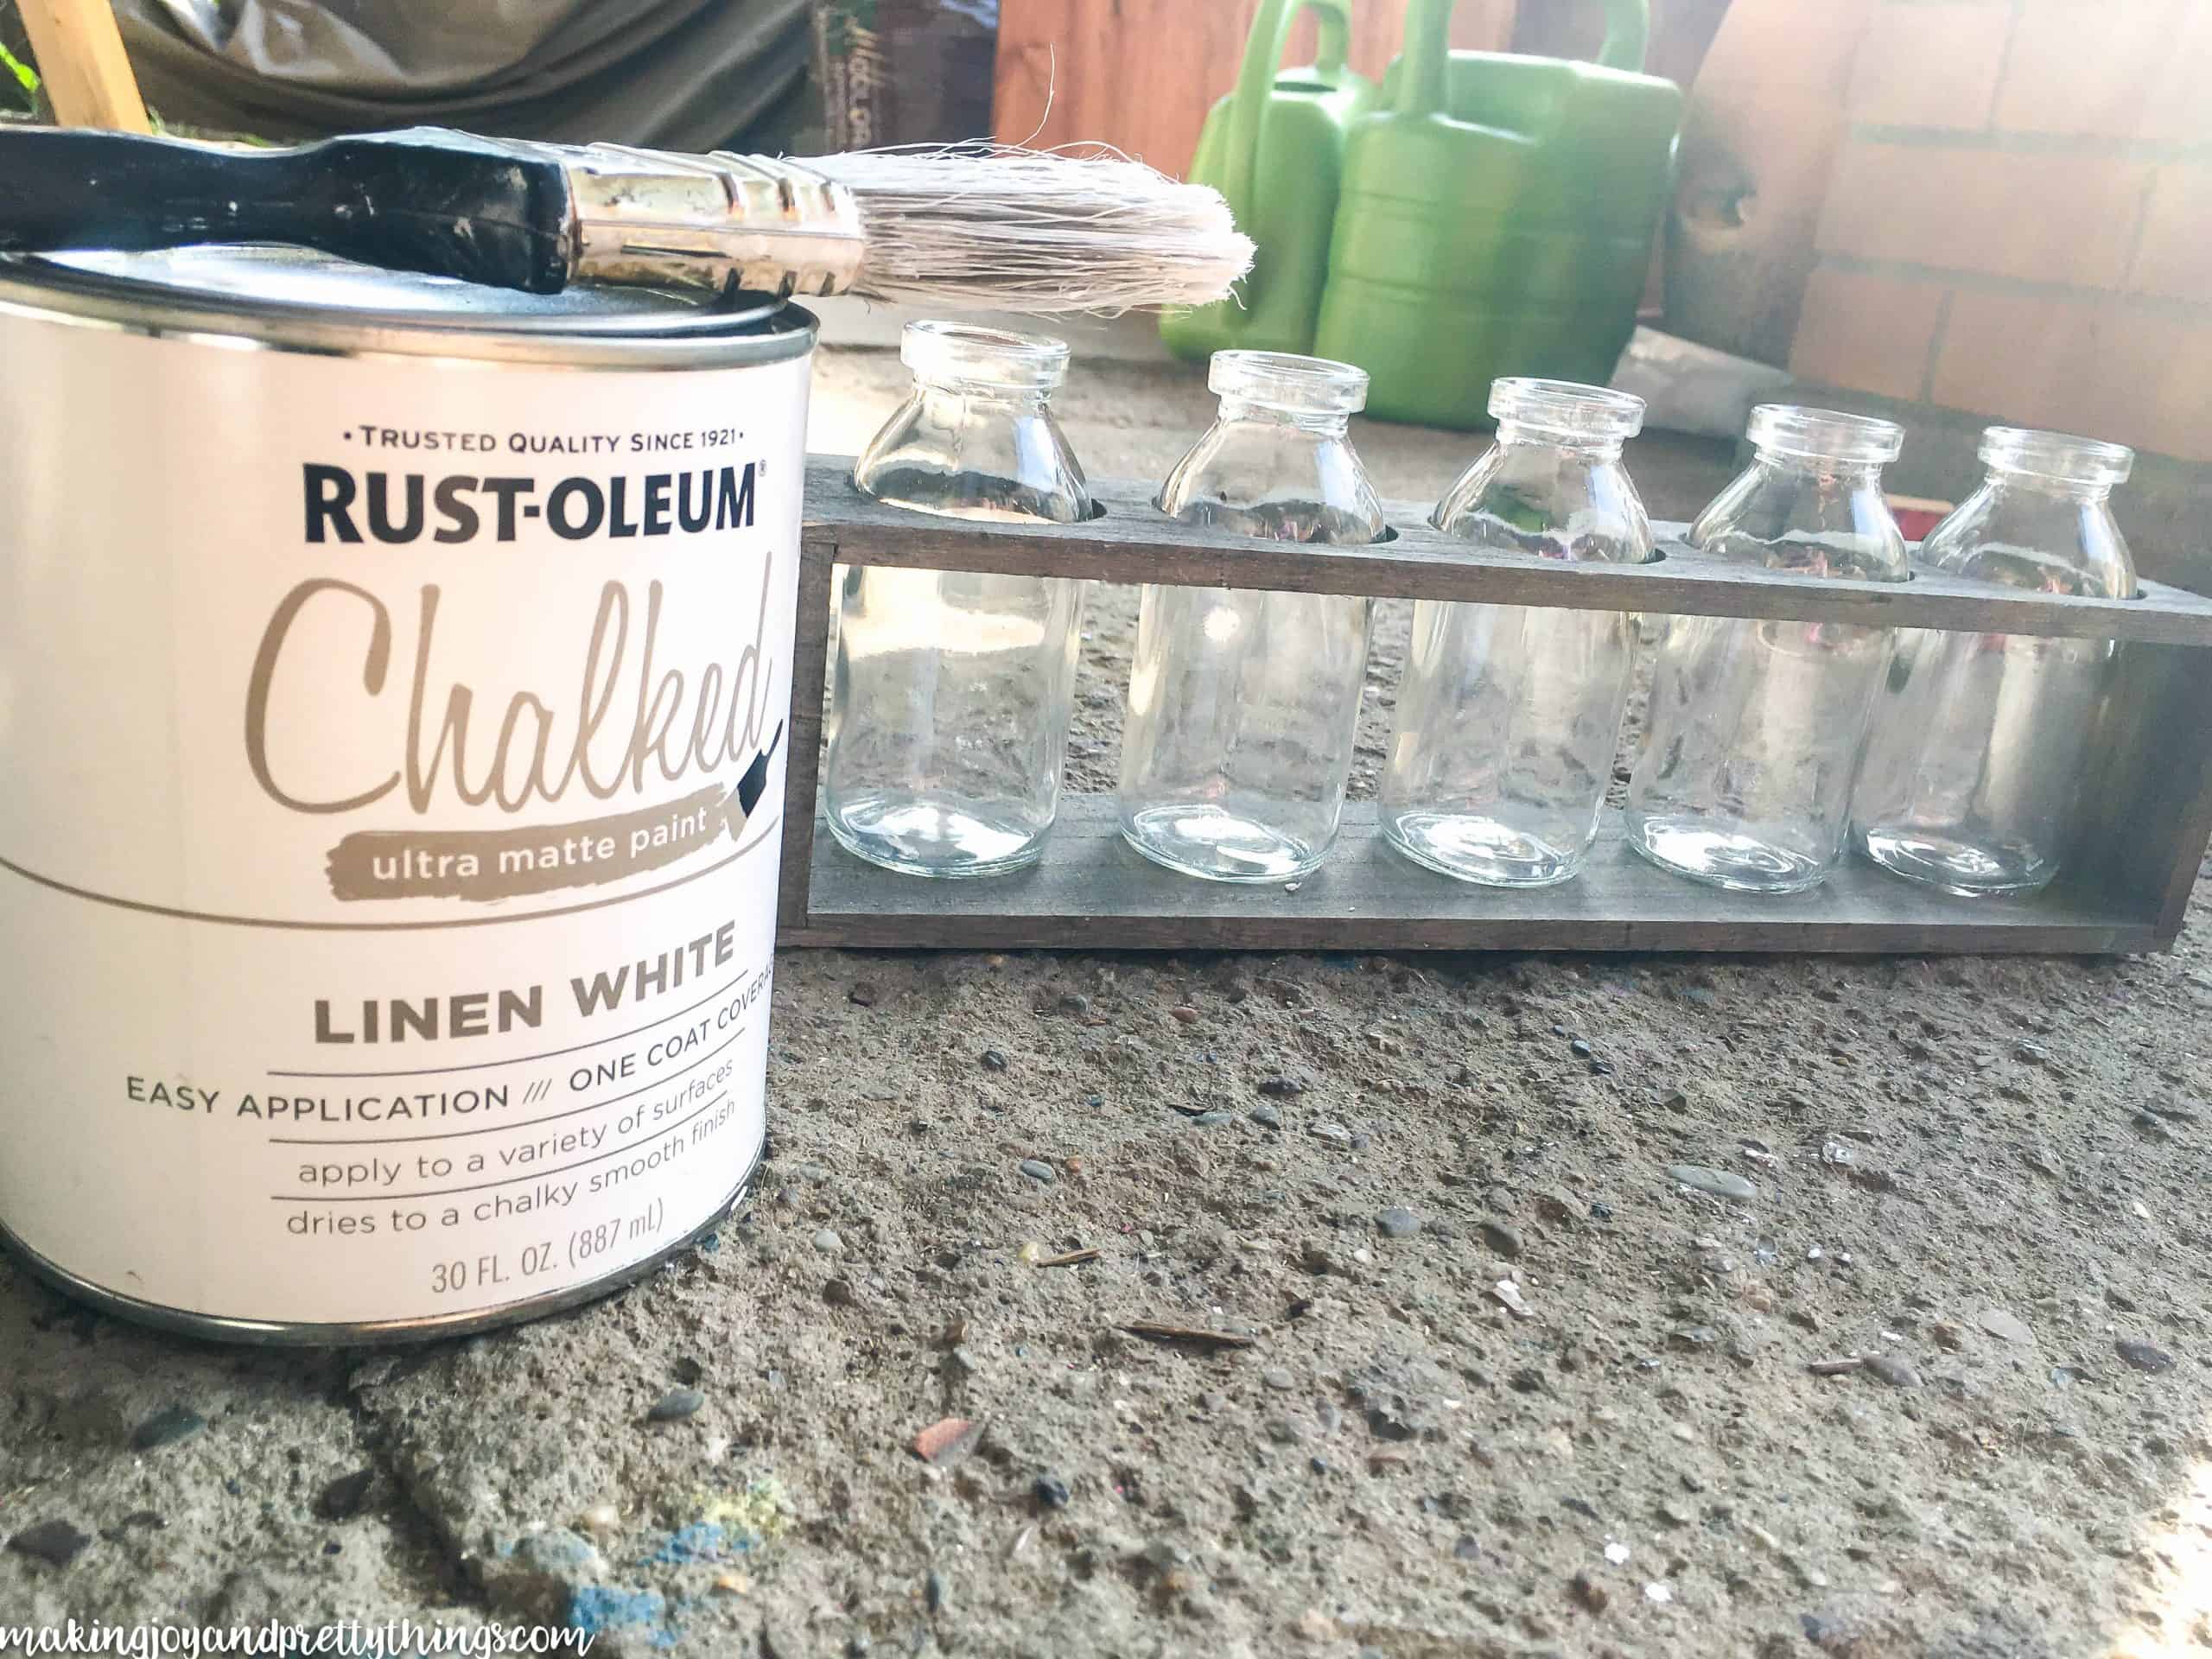 A can of Rust-Oleum chalked linen white paint and a wide paint brush sits next to a wood box with five glass milk jars.